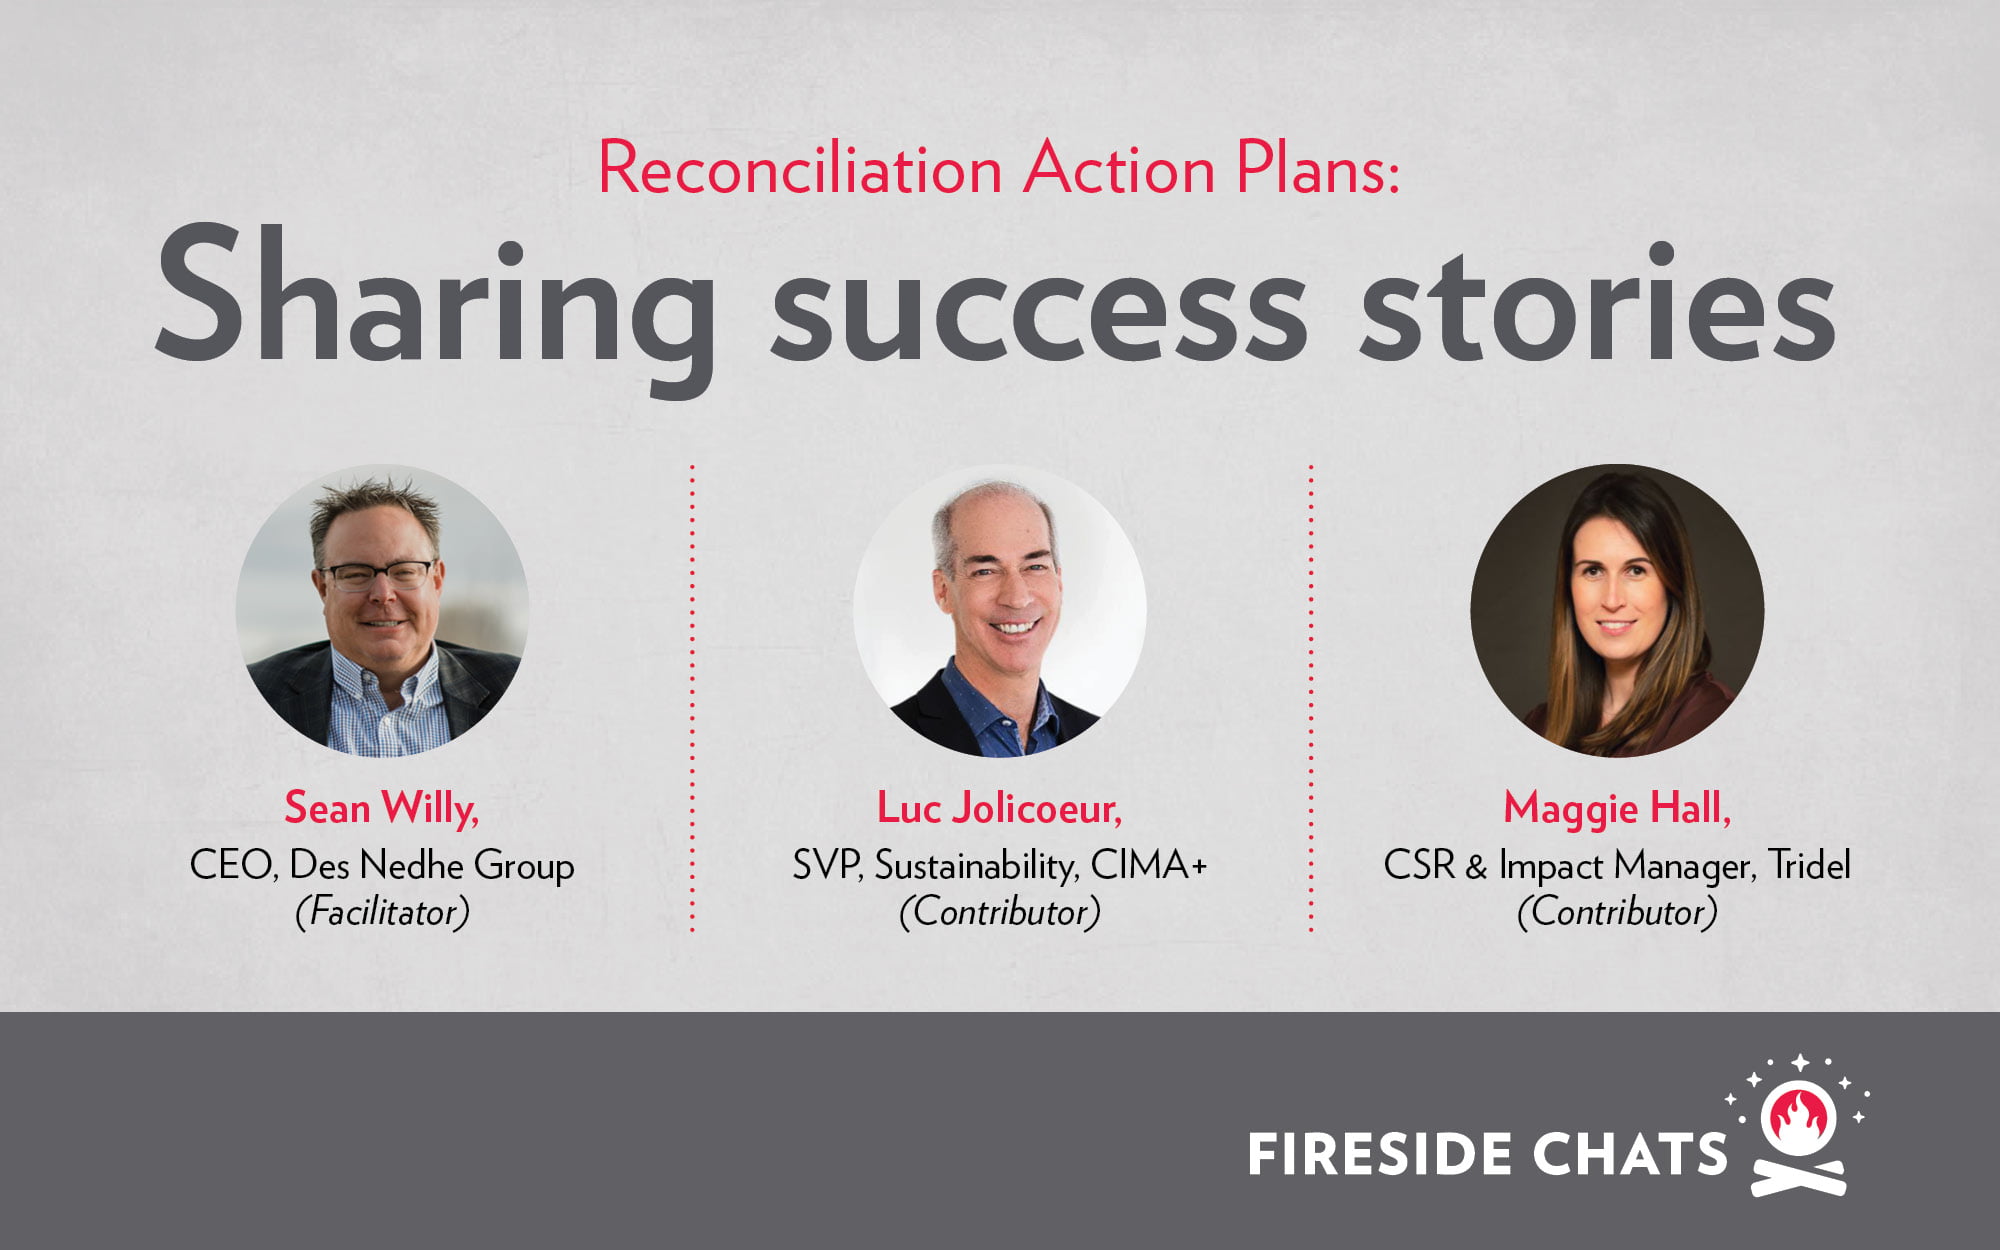 Introducing the first Creative Fireside Chat on Reconciliation Action Plans 